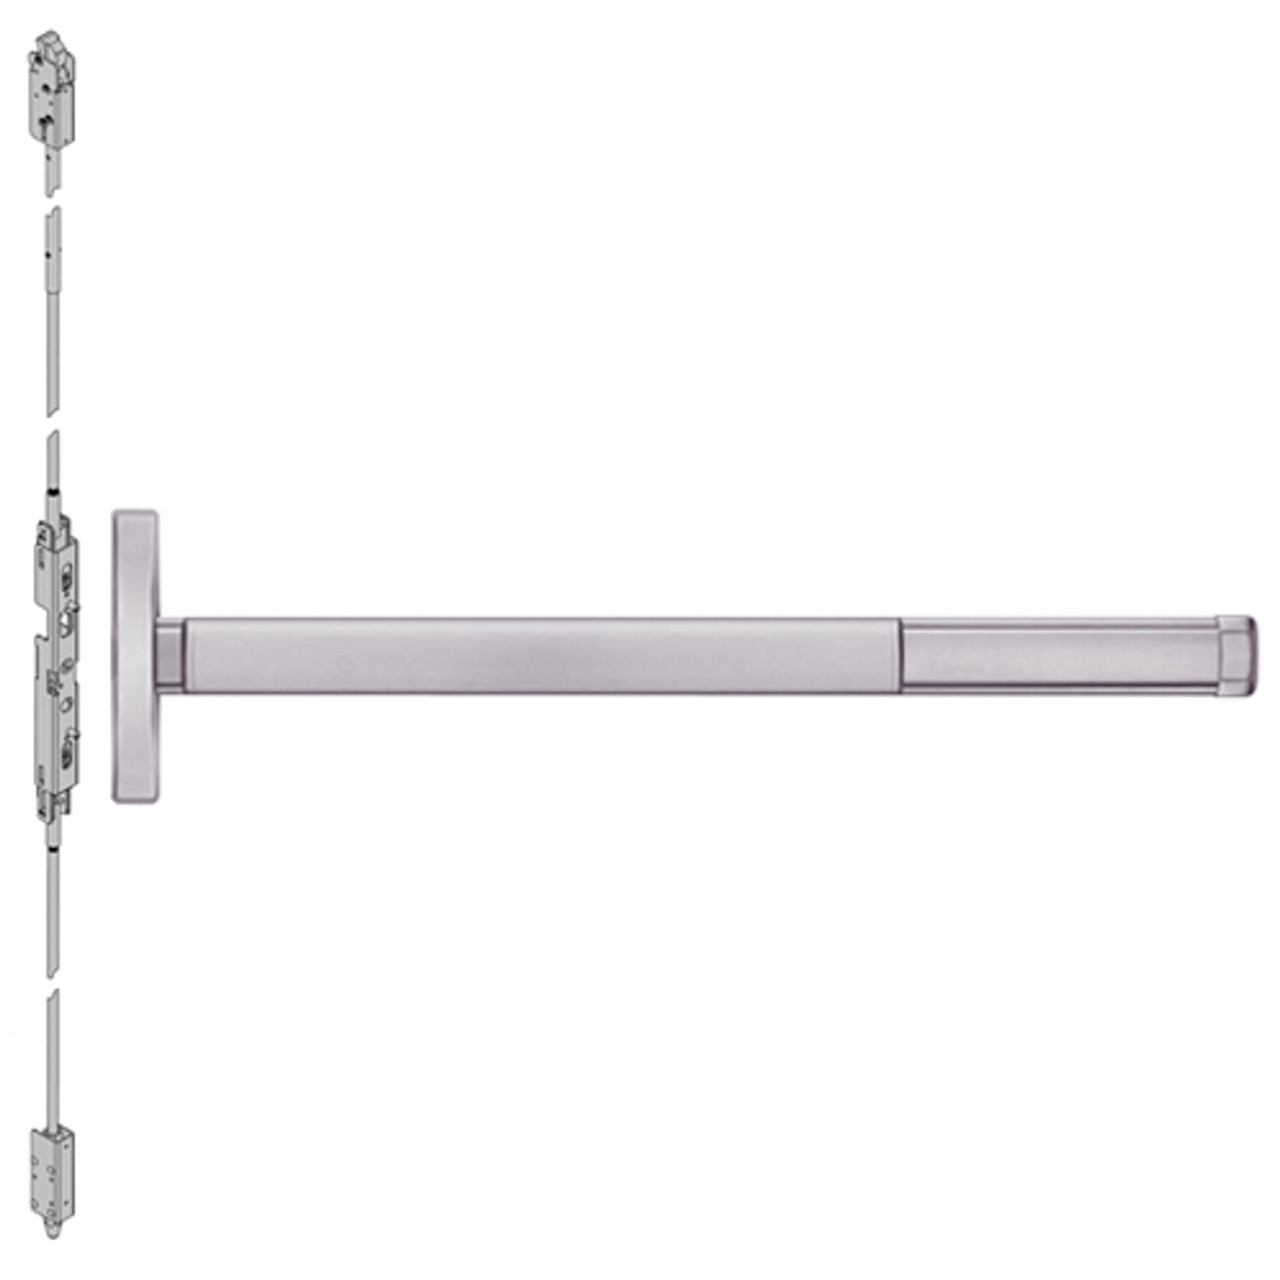 2614LBRCD-630-48 PHI 2600 Series Non Fire Rated Concealed Vertical Rod Exit Device Prepped for Lever Always Active with Cylinder Dogging and LBR in Satin Stainless Steel Finish